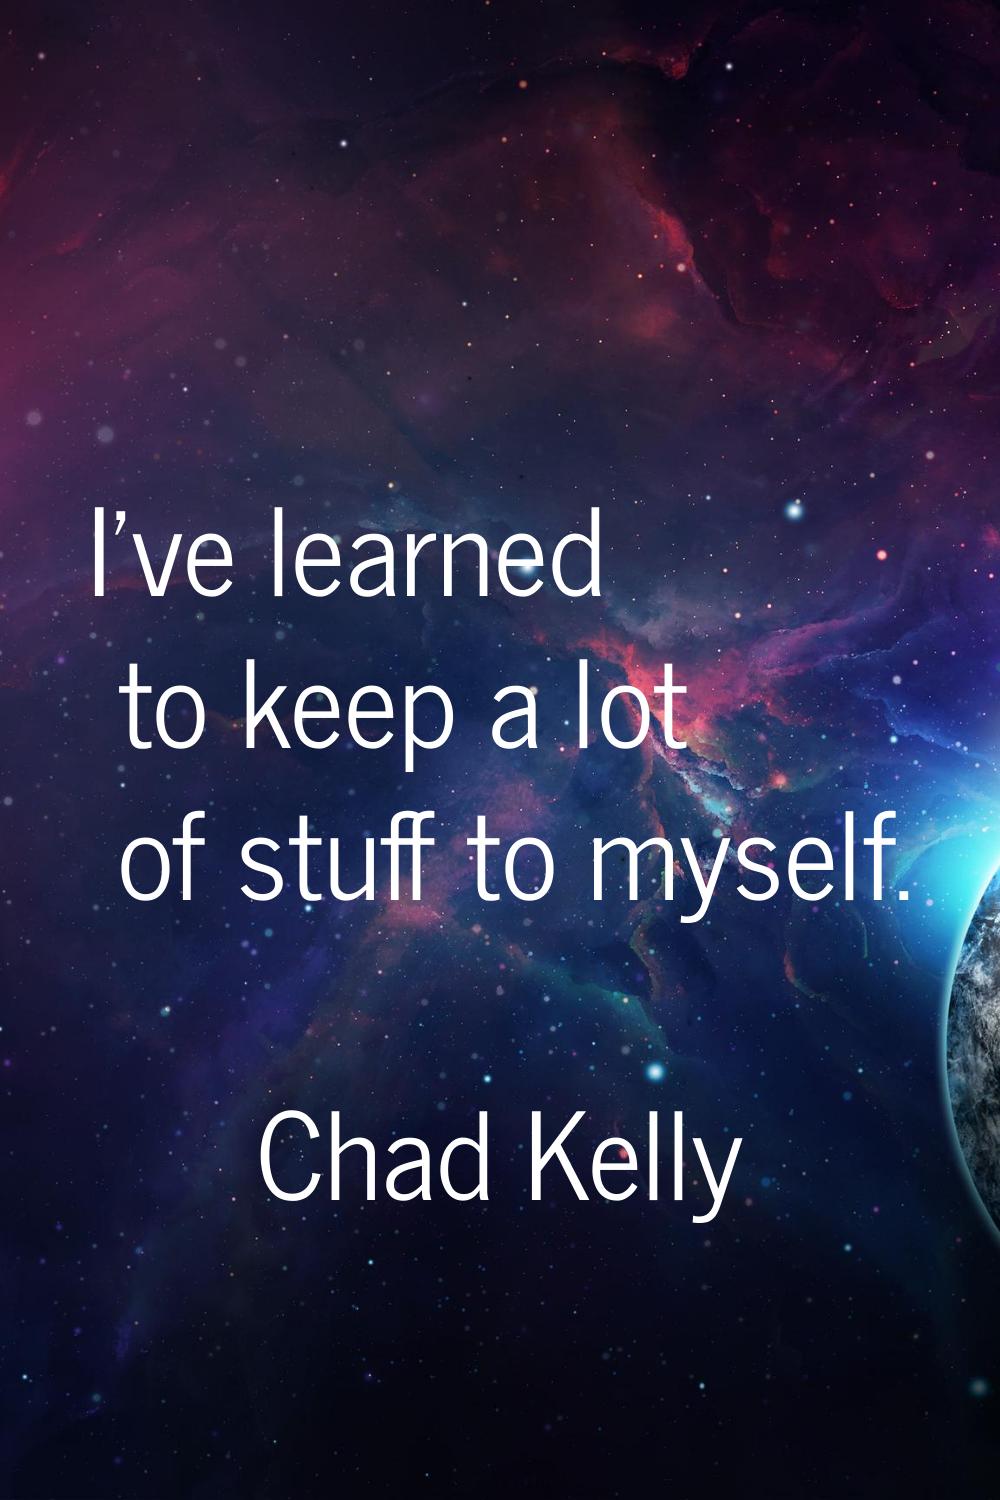 I've learned to keep a lot of stuff to myself.